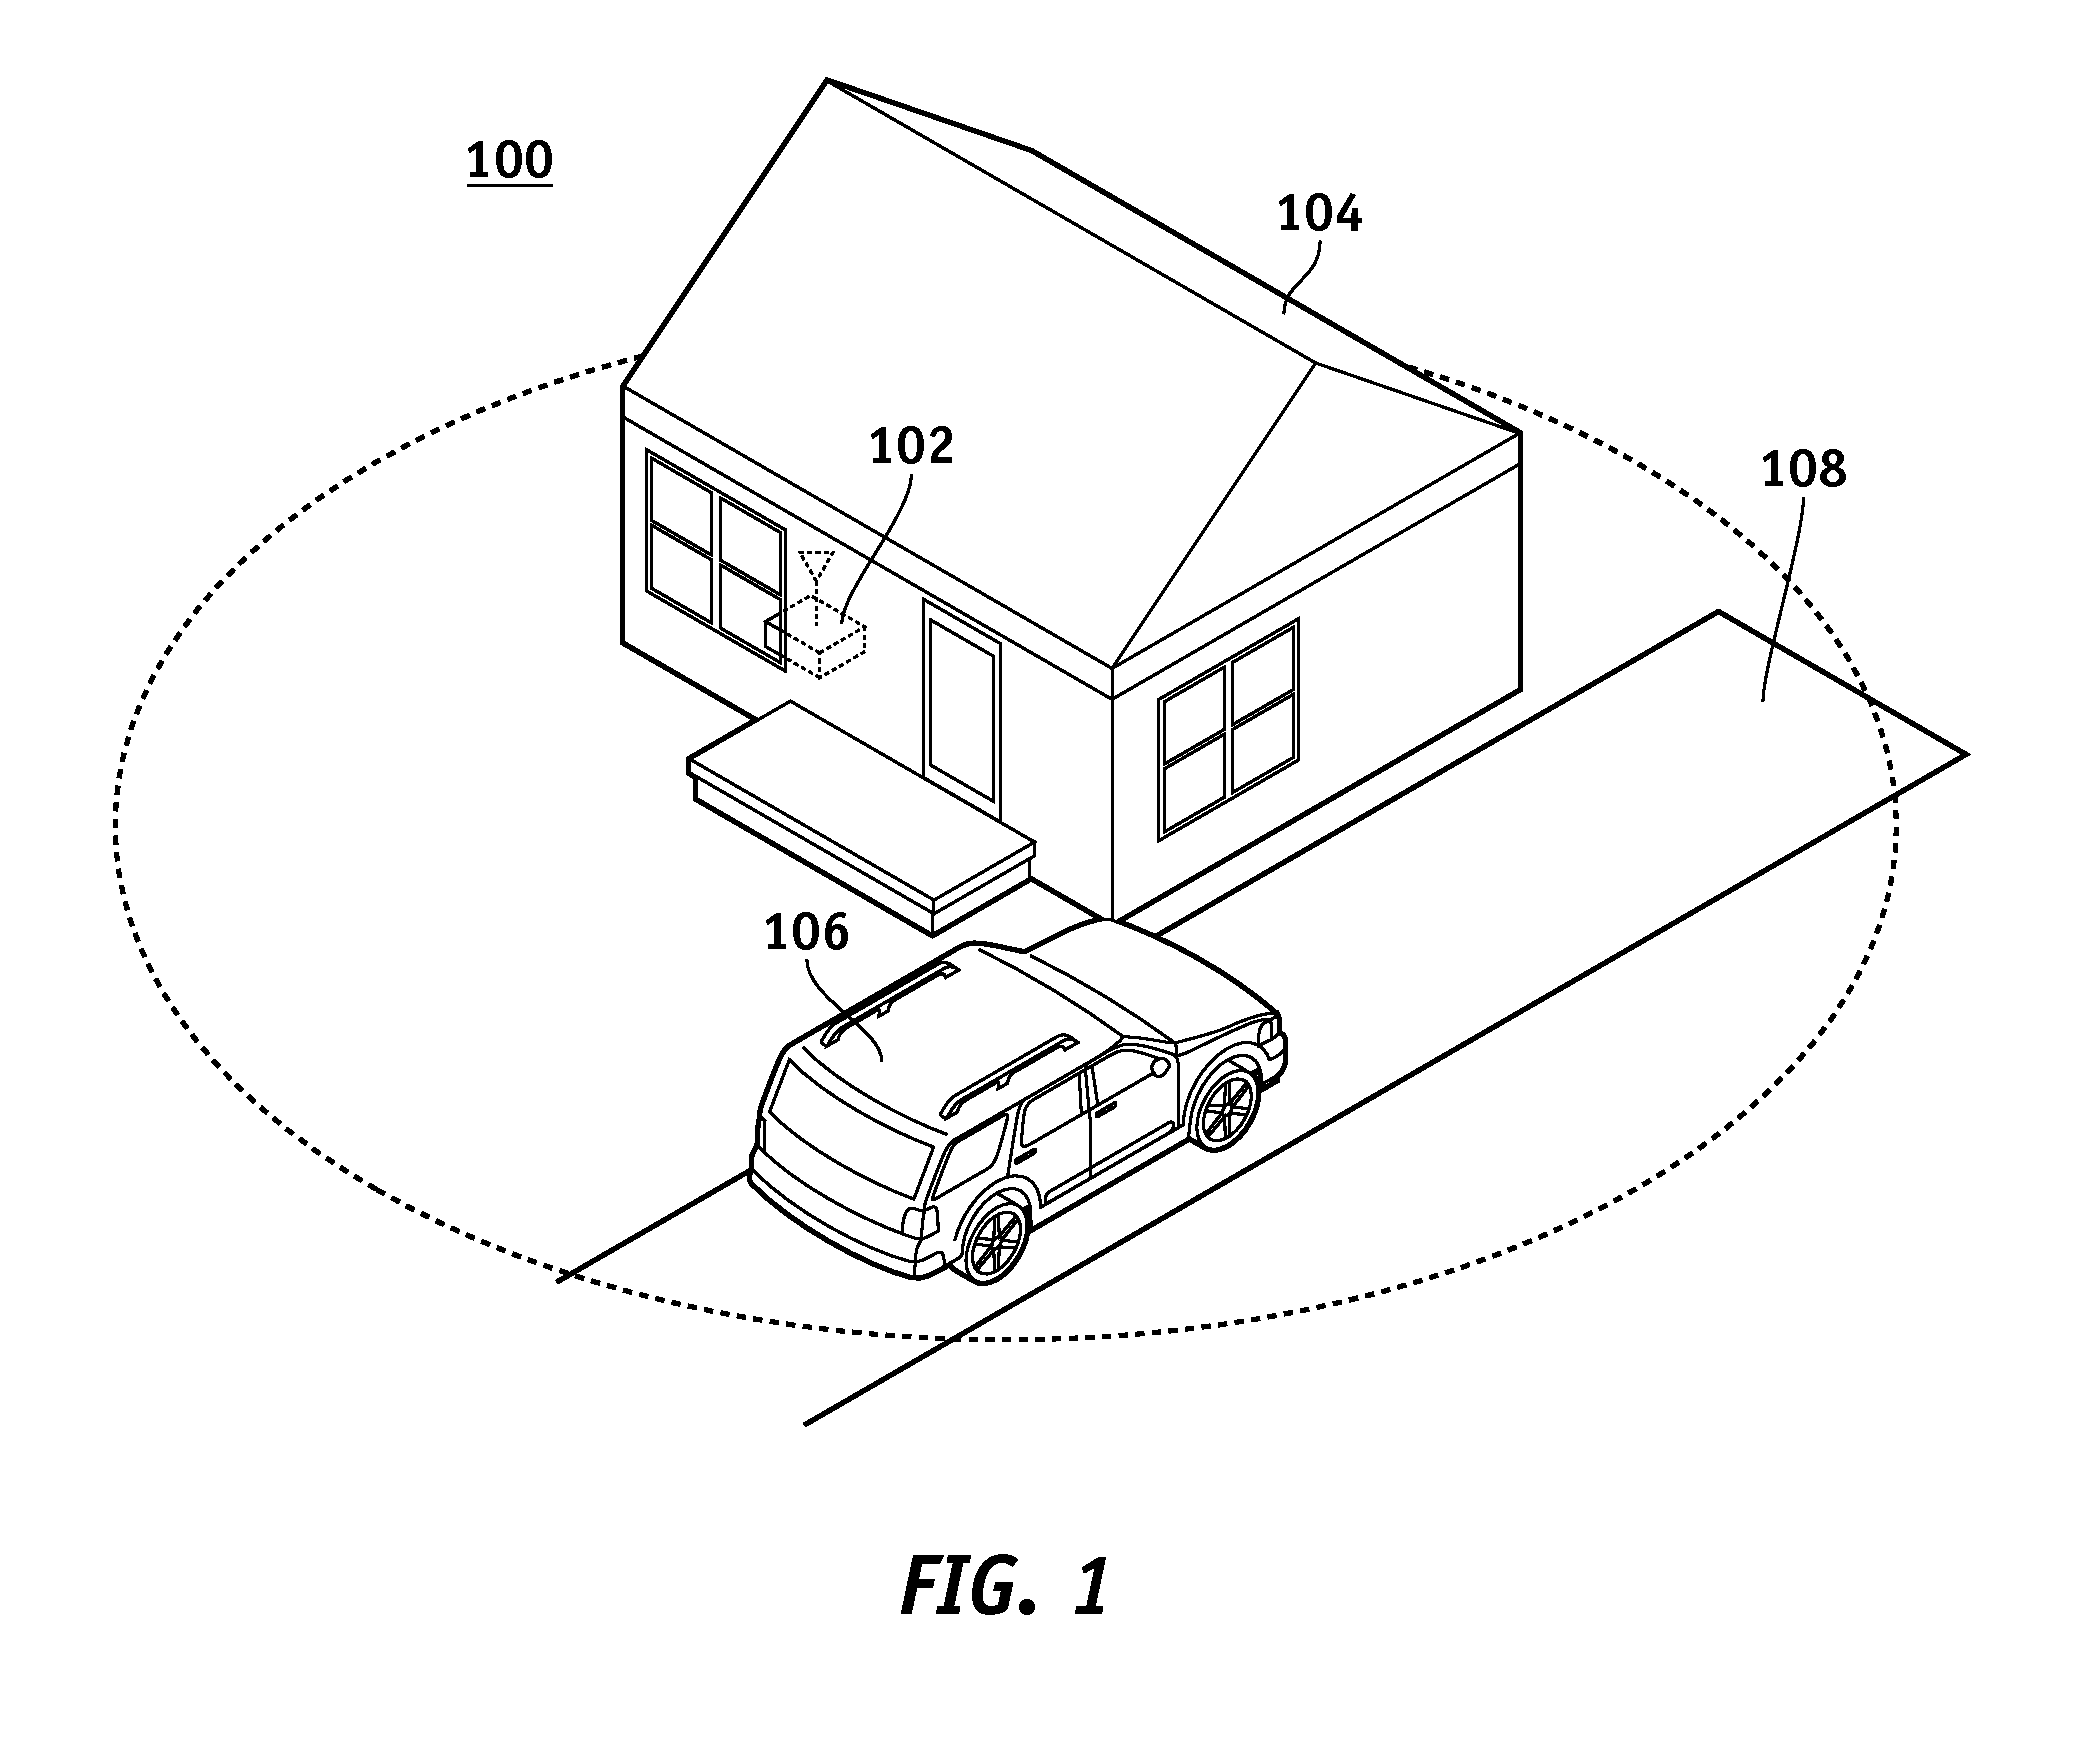 Initiating wireless communication between a vehicle and an access point